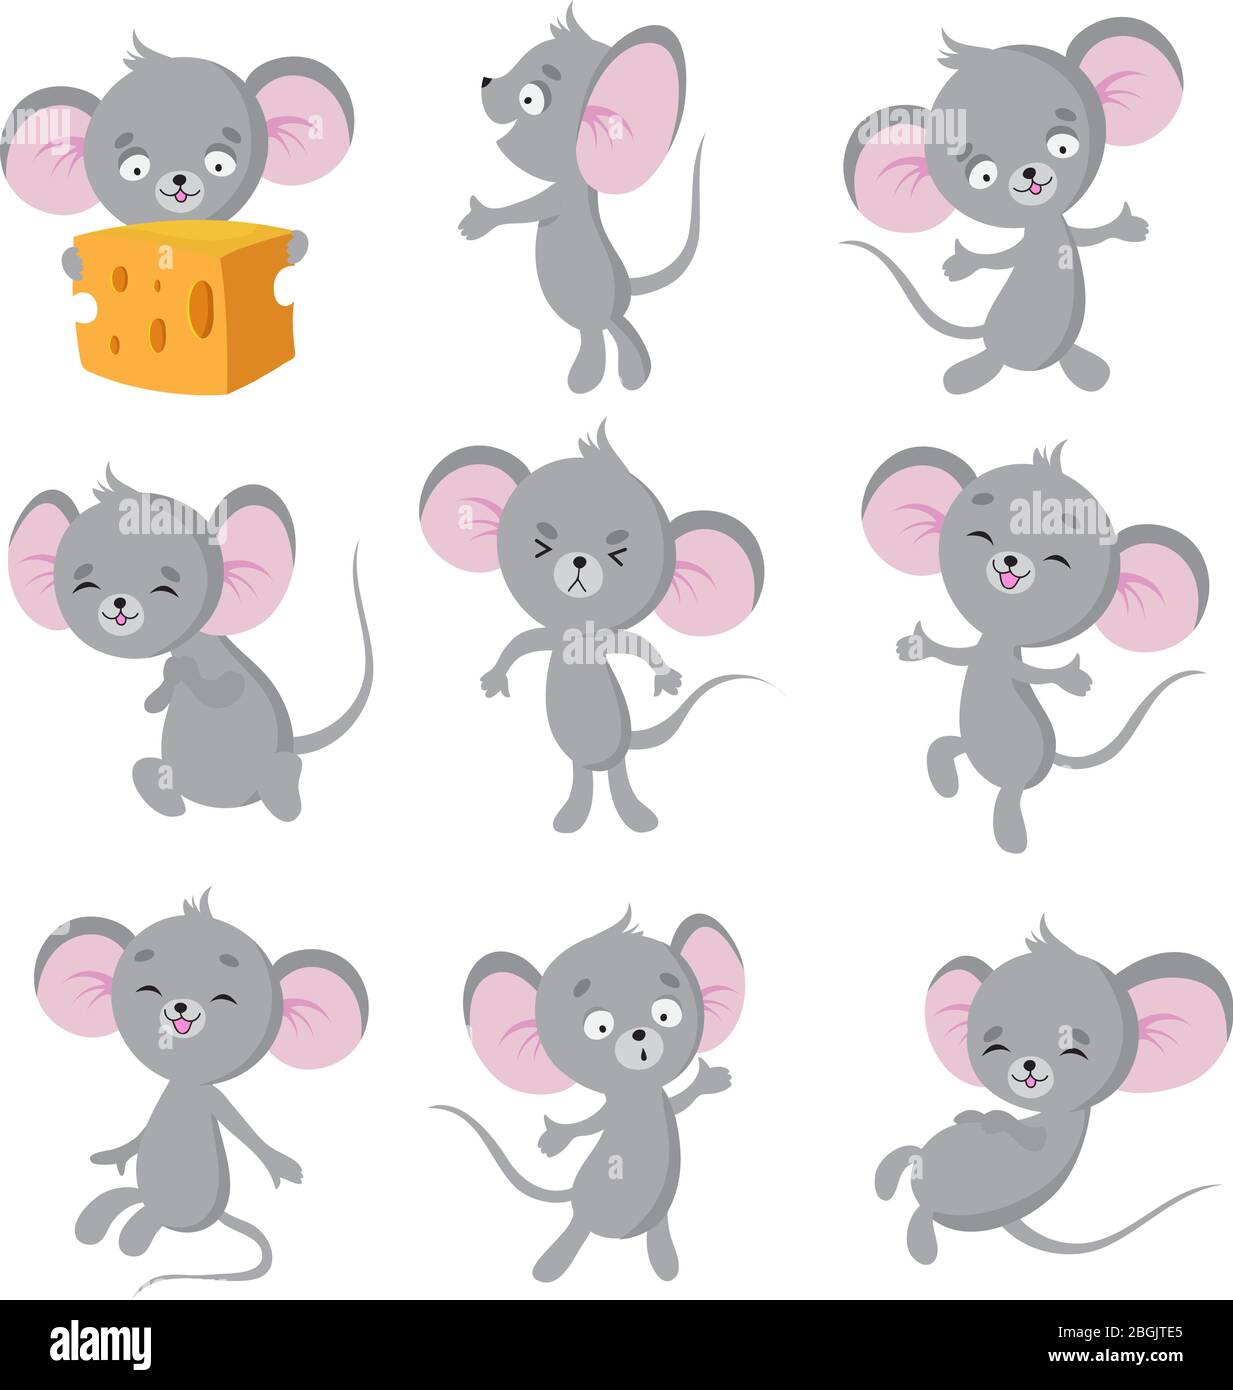 Cartoon mouse. Gray mice in different poses. Cute wild rat animal vector characters. Wild cute mouse and rat, rodent mascot illustration Stock Vector